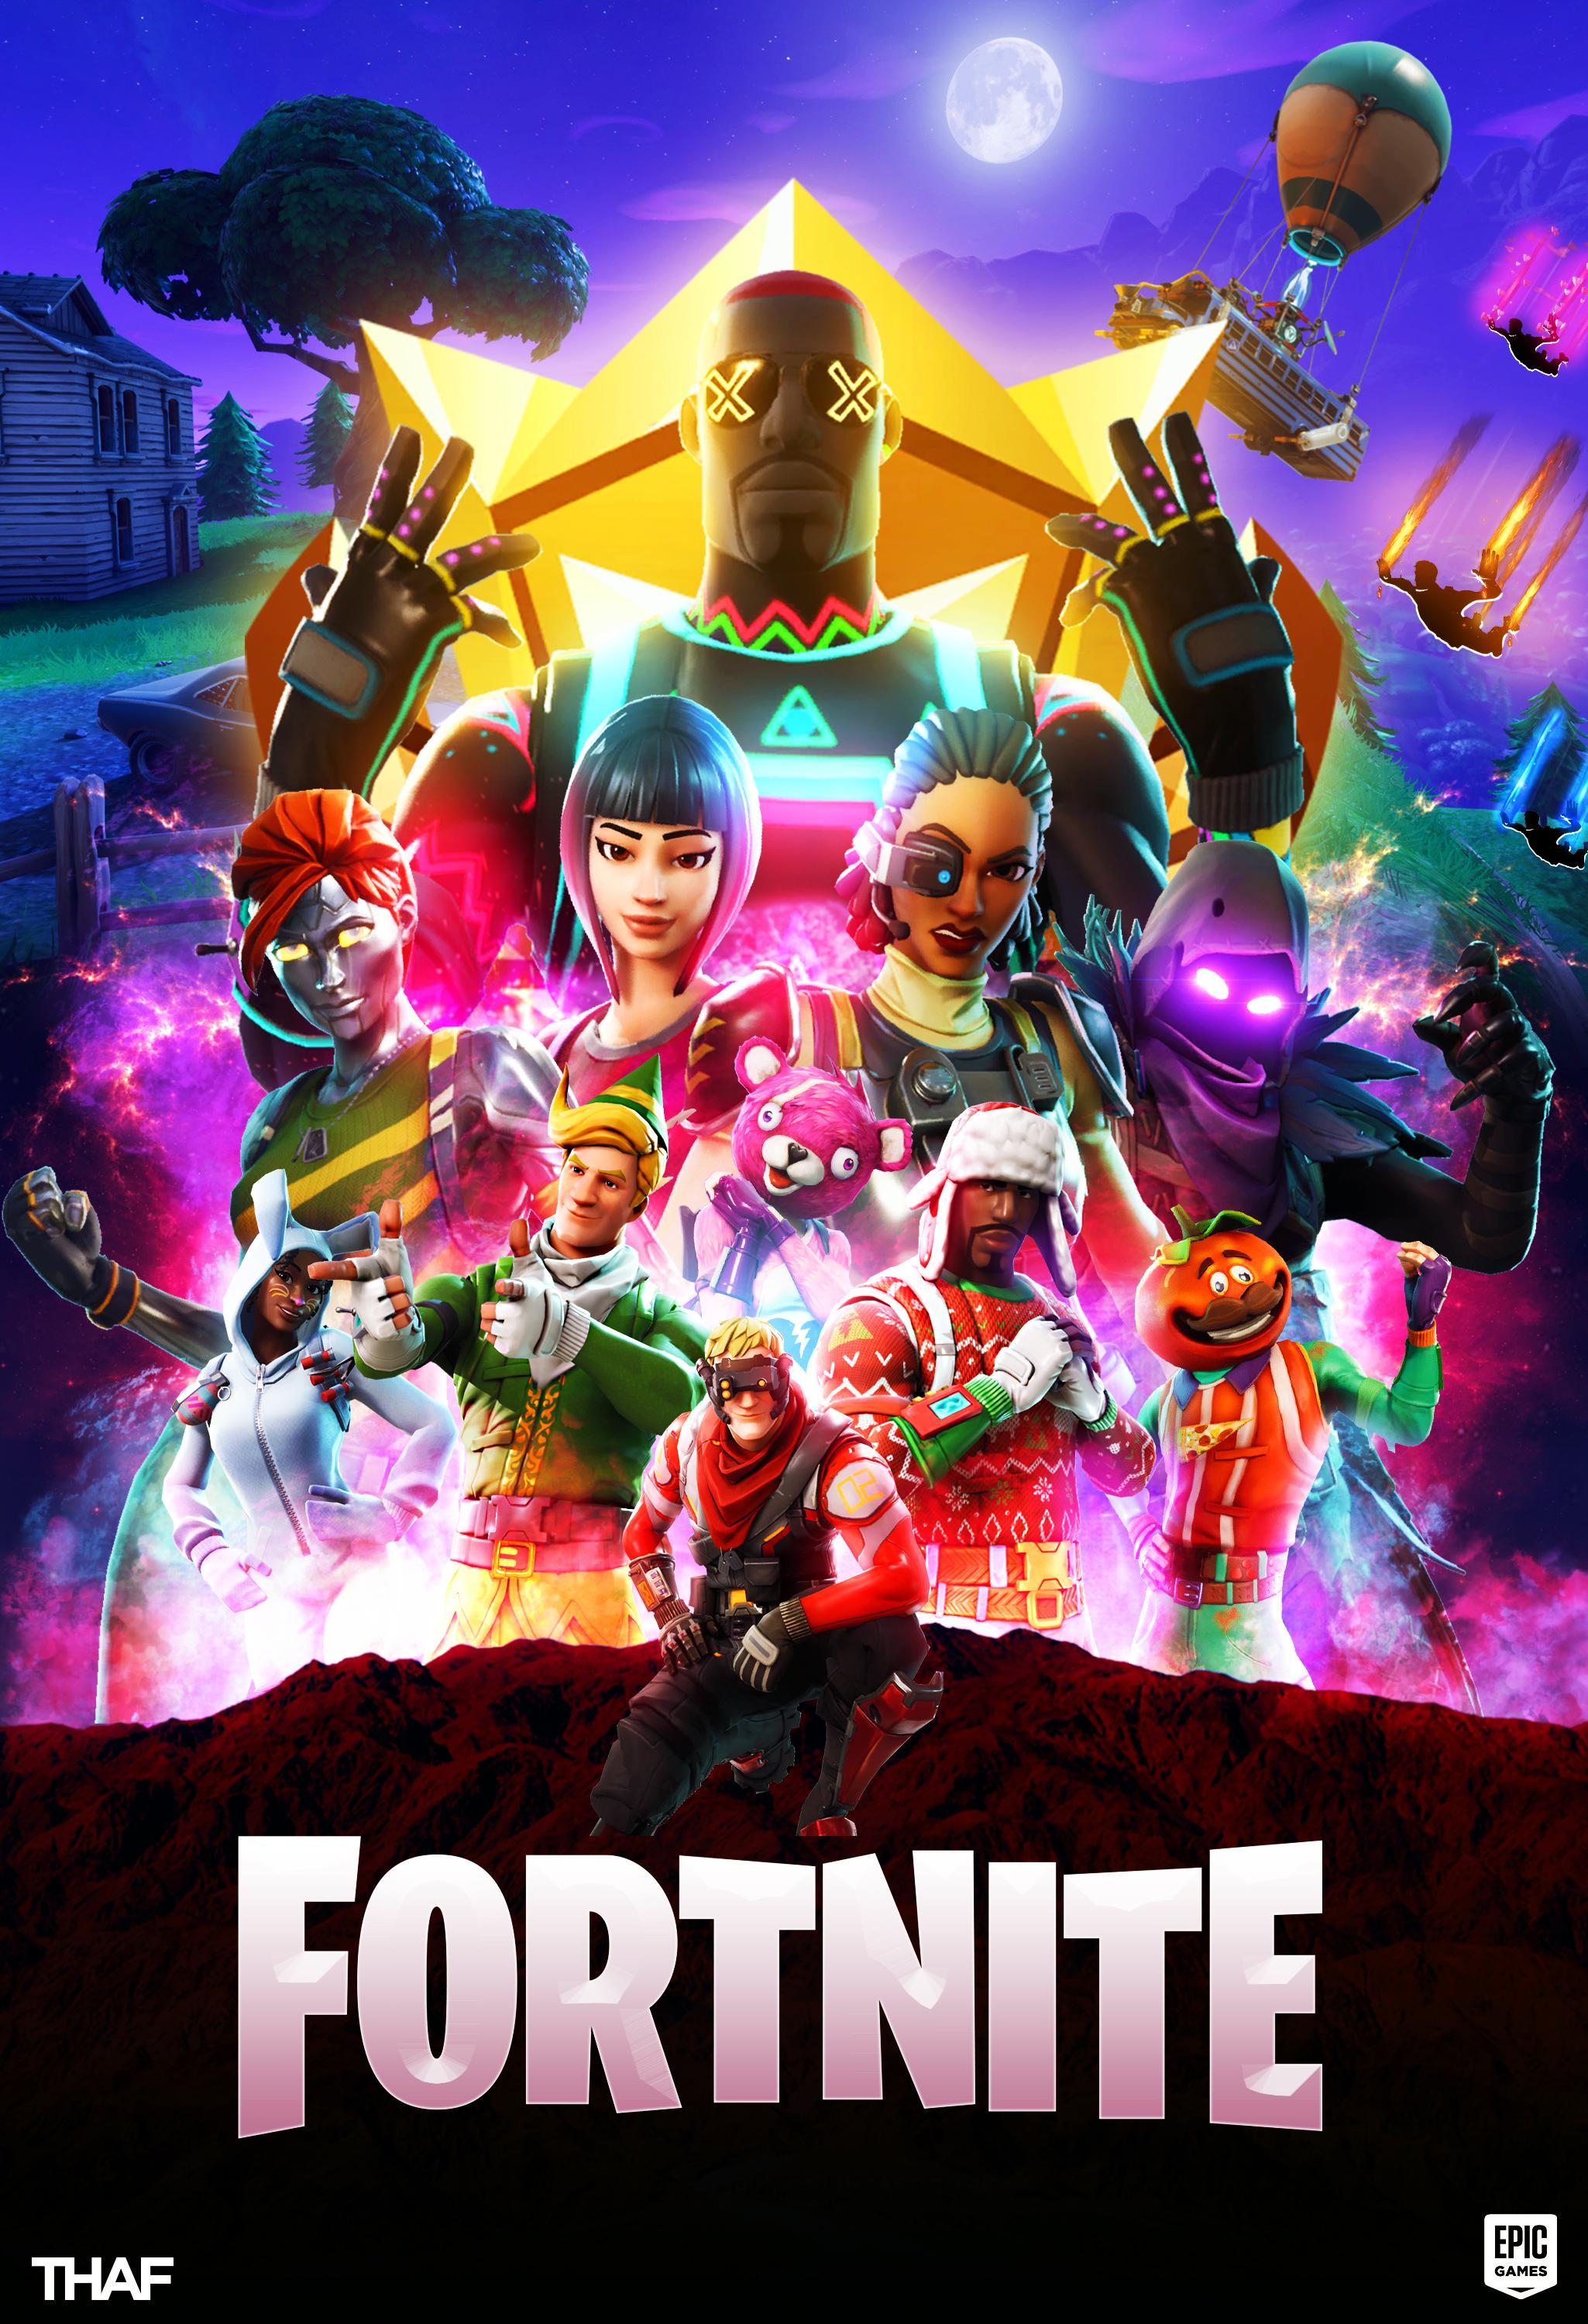 Made this poster for Fortnite. Hope you all like!